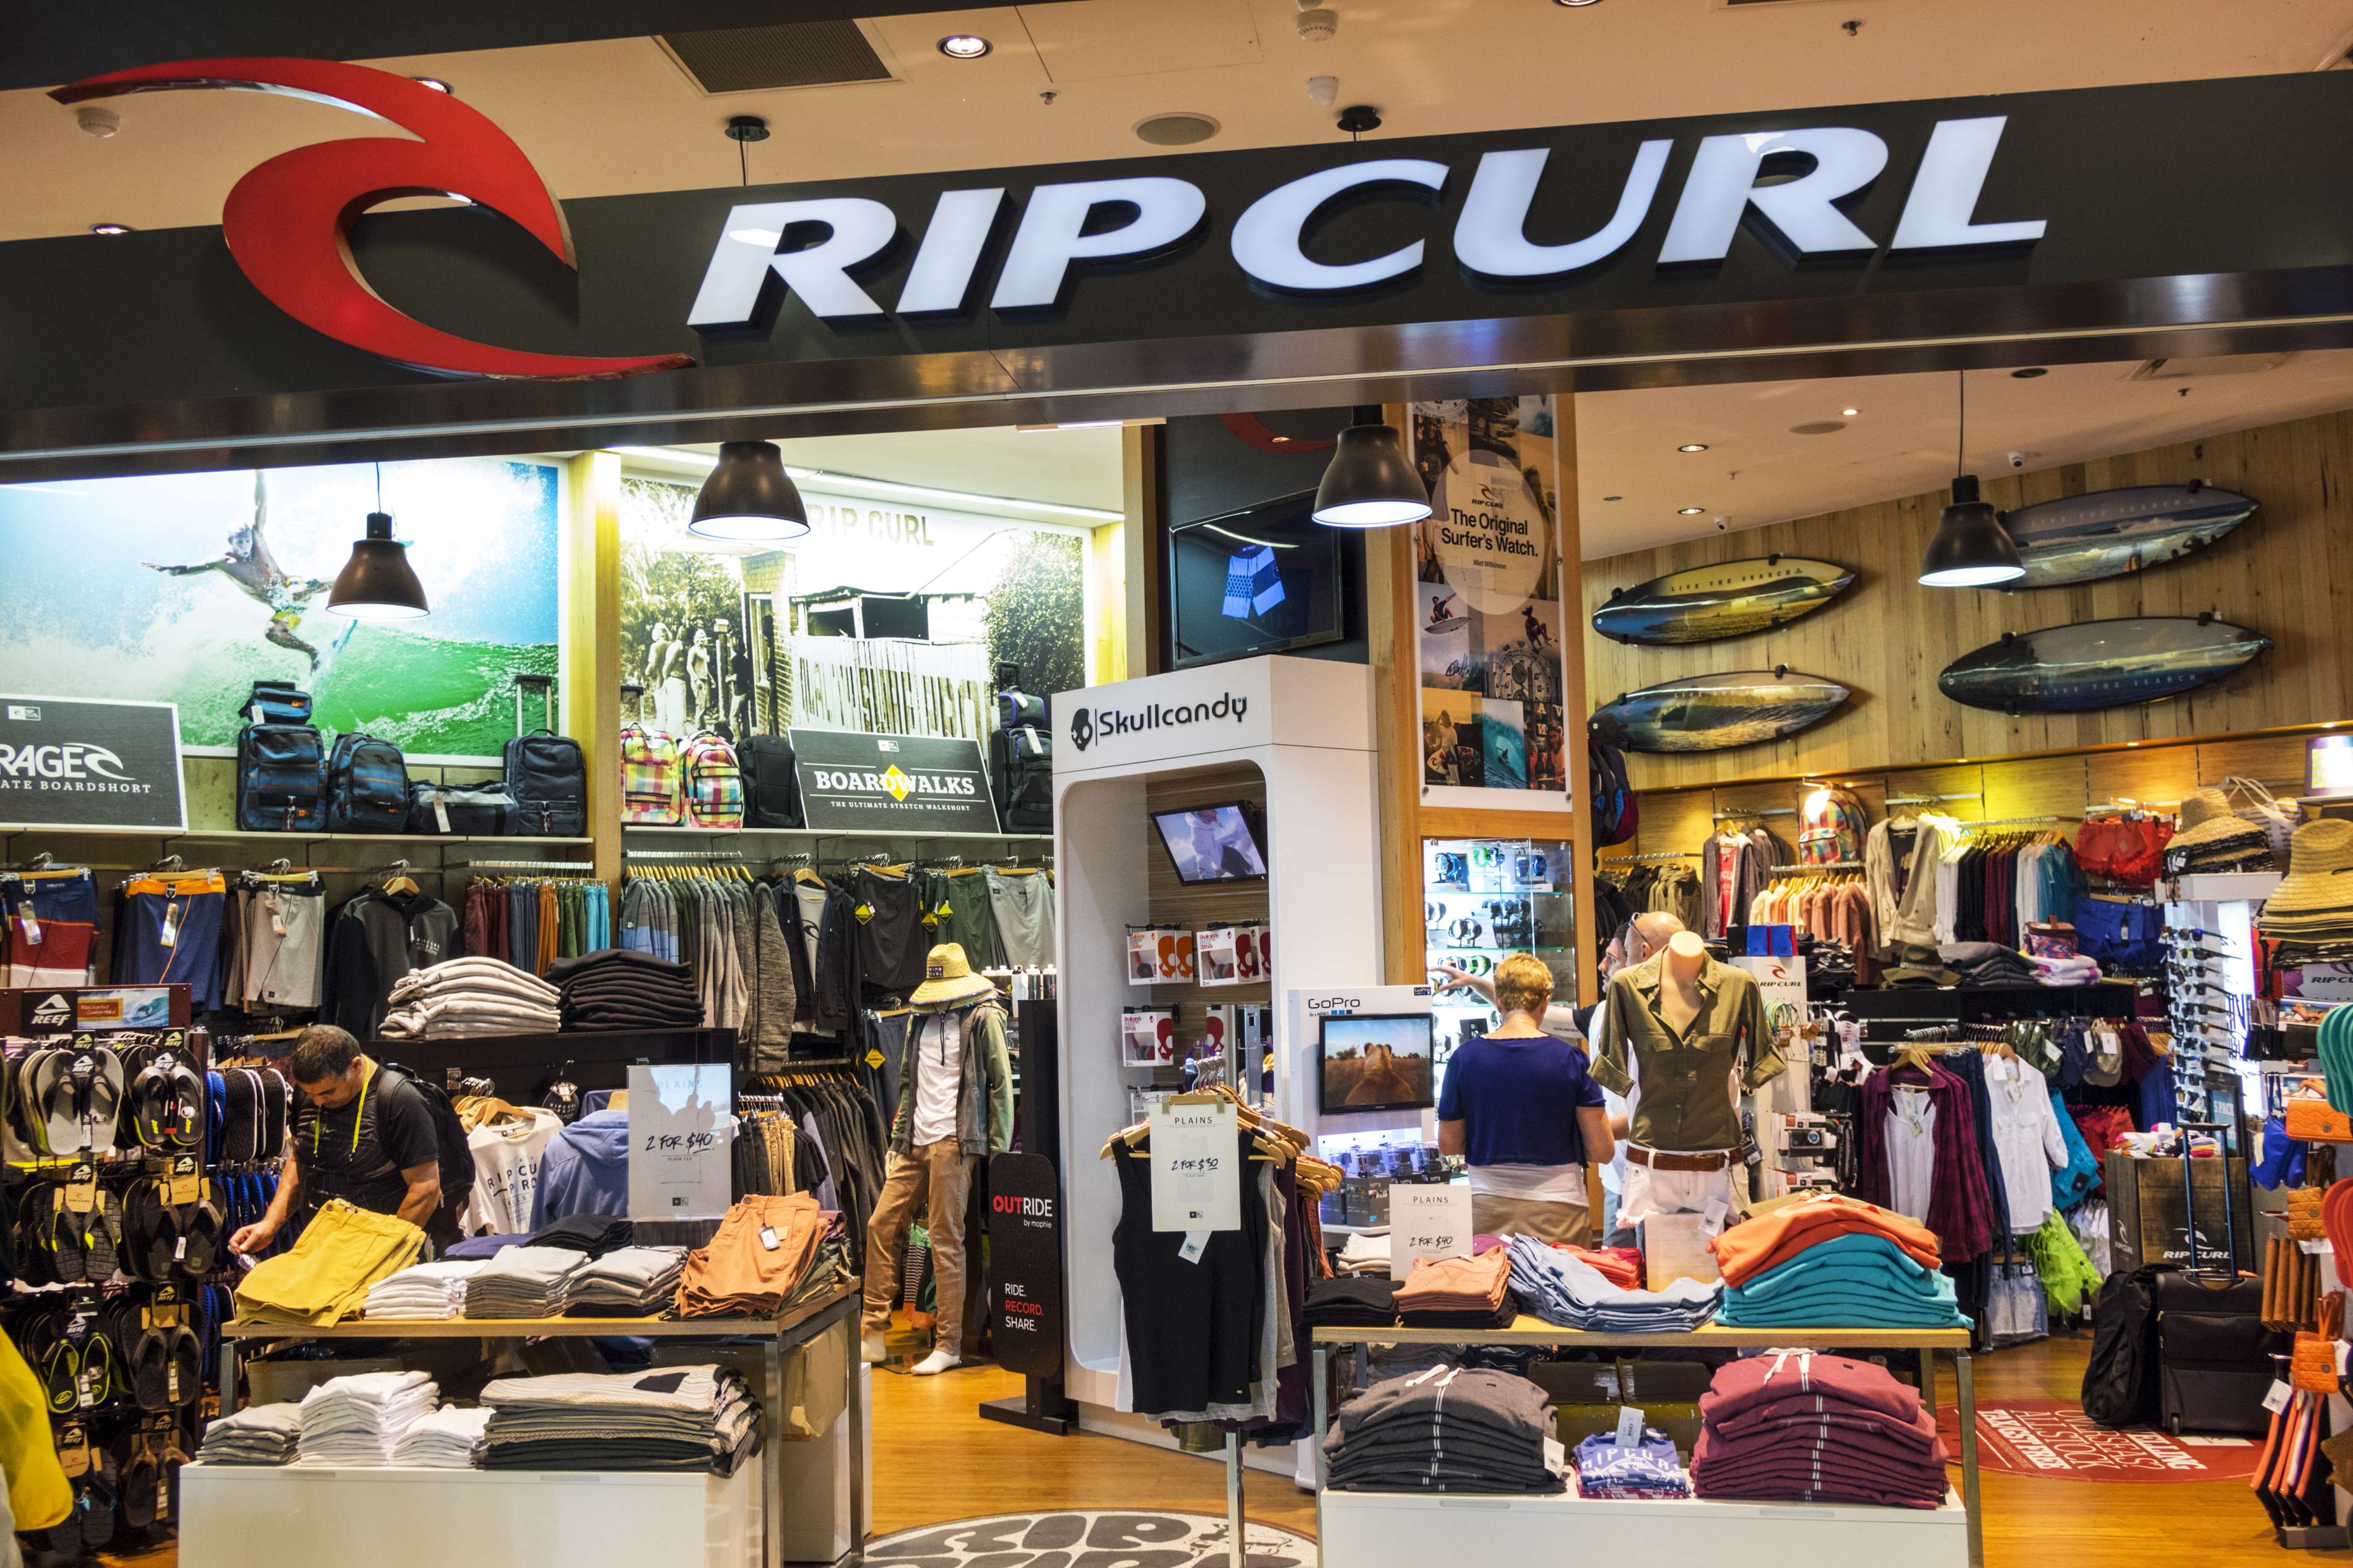 Rip Curl was sold for 350 million